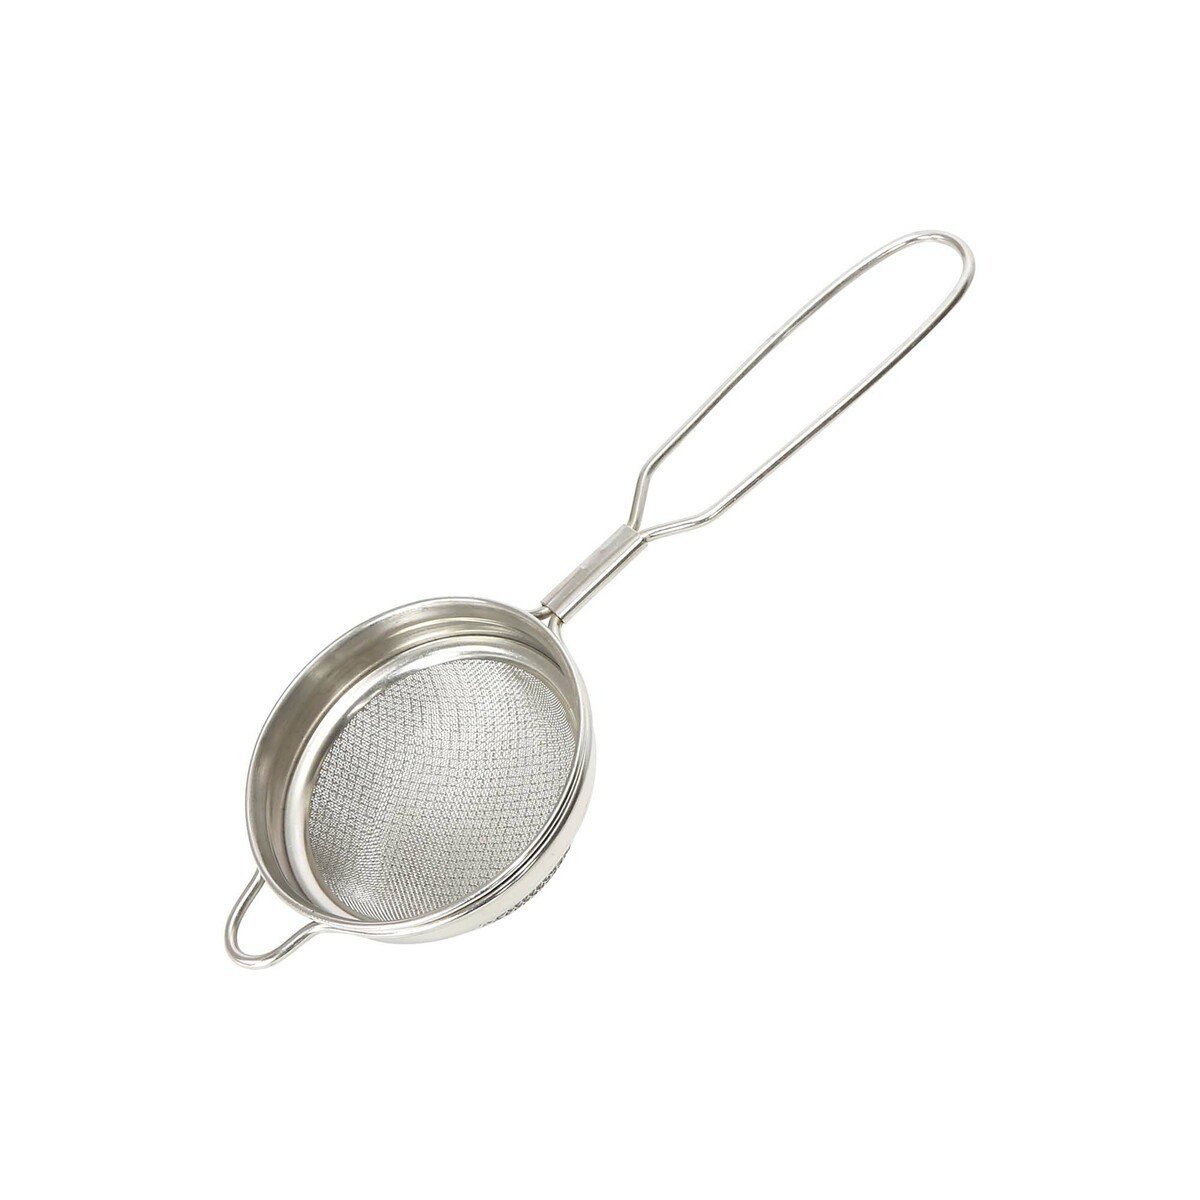 Rabbit Stainless Steel Strainer Command Double Mesh 7cm UP1